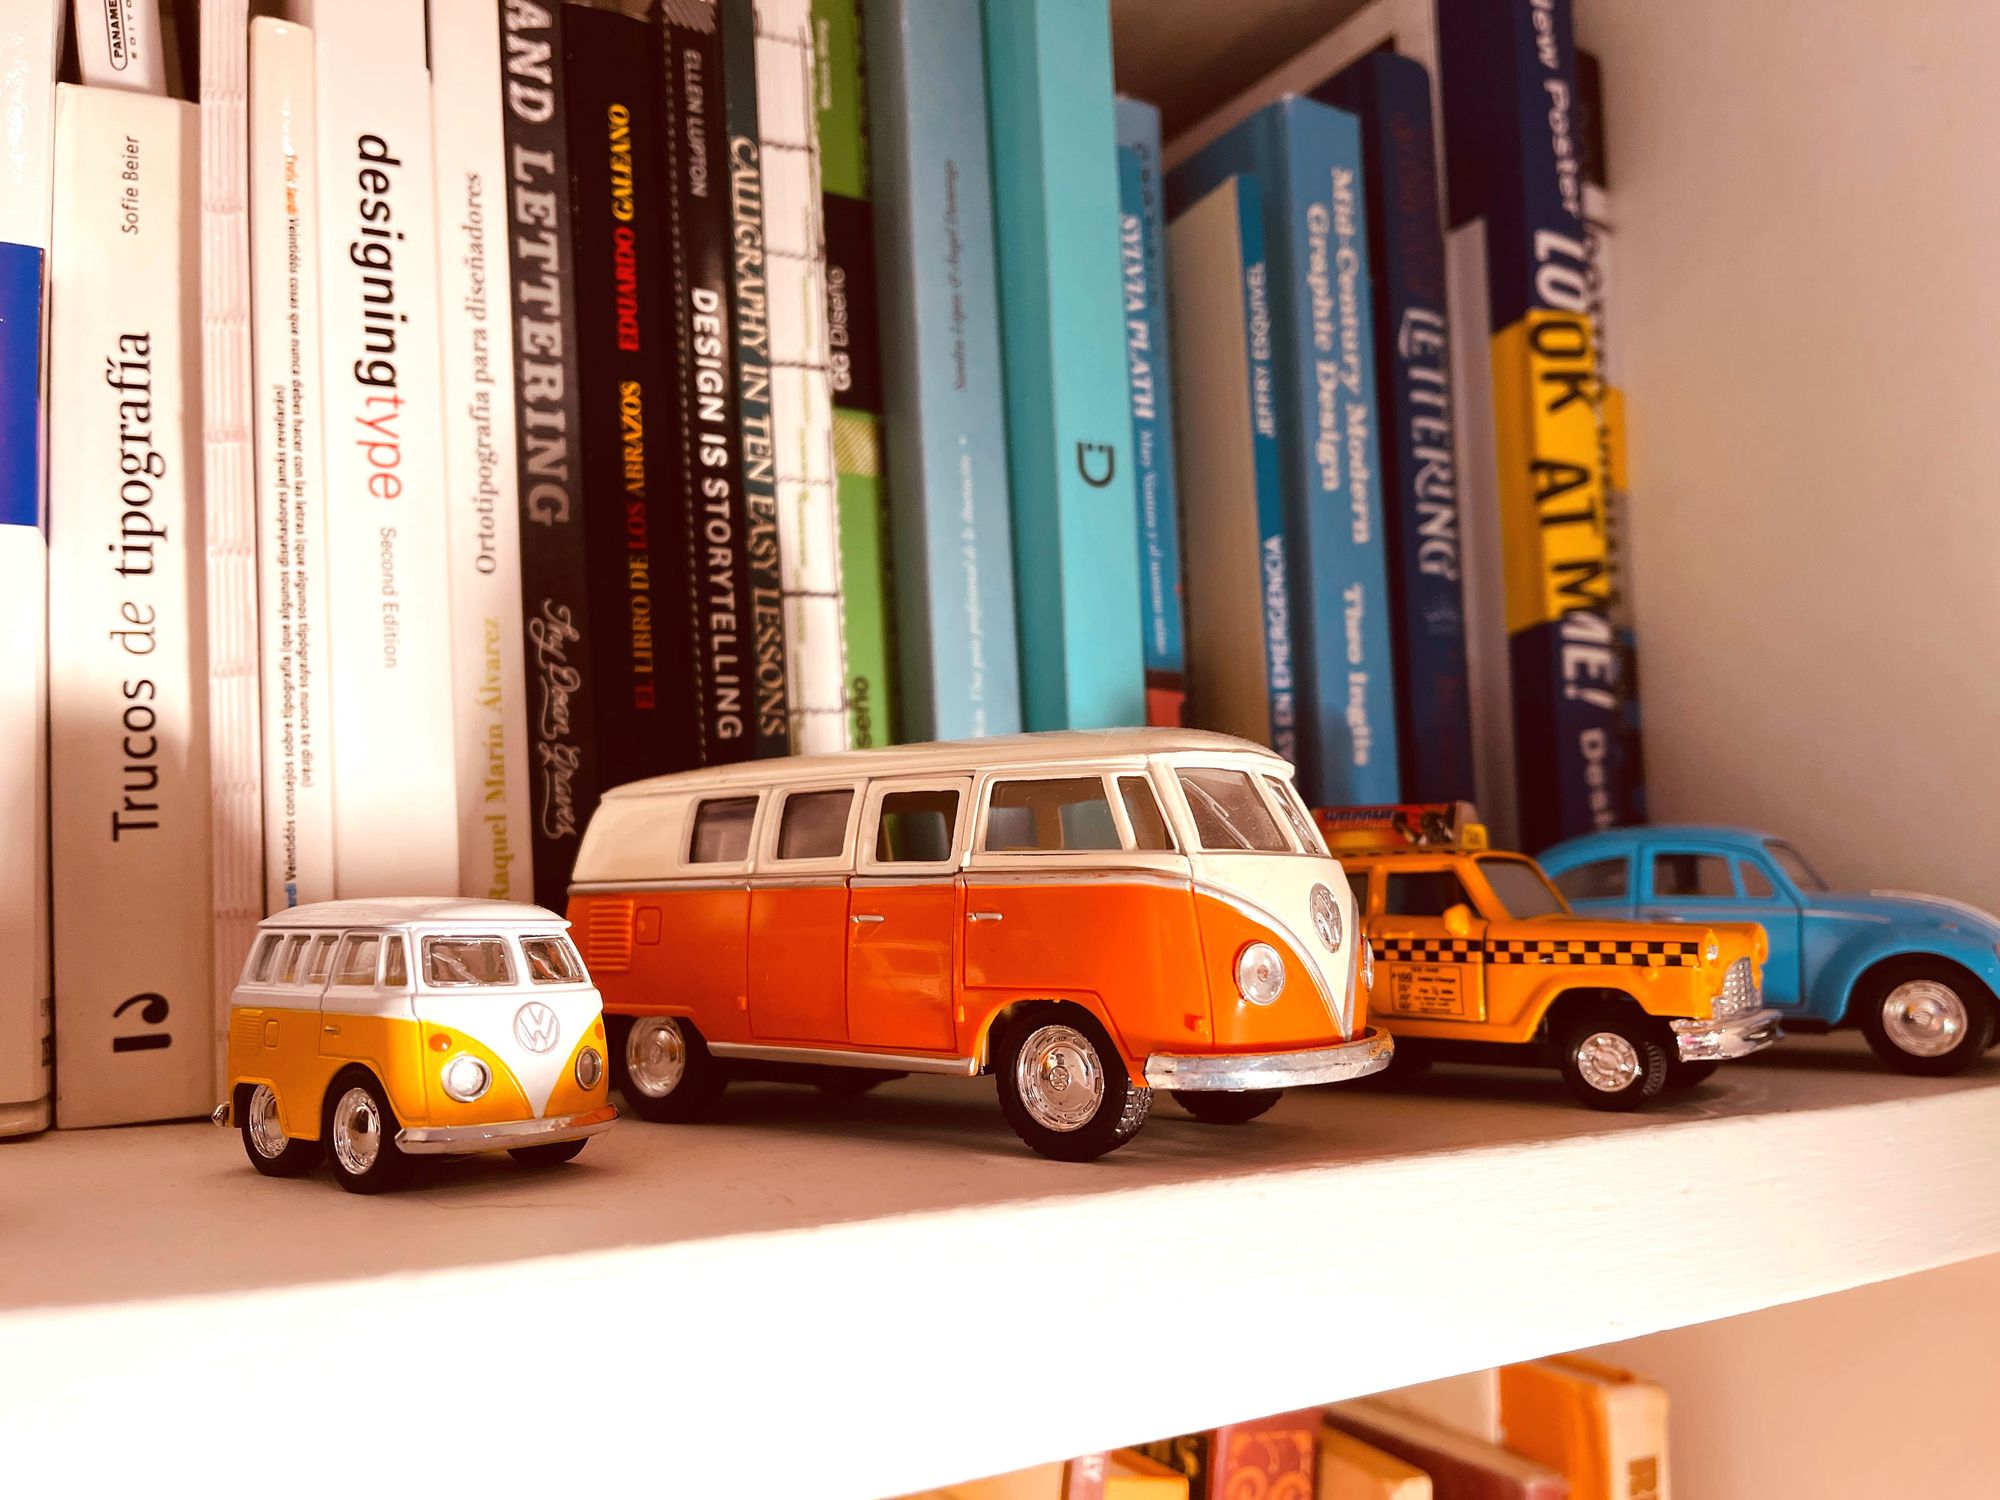 A collection of books and toy cars on a shelf